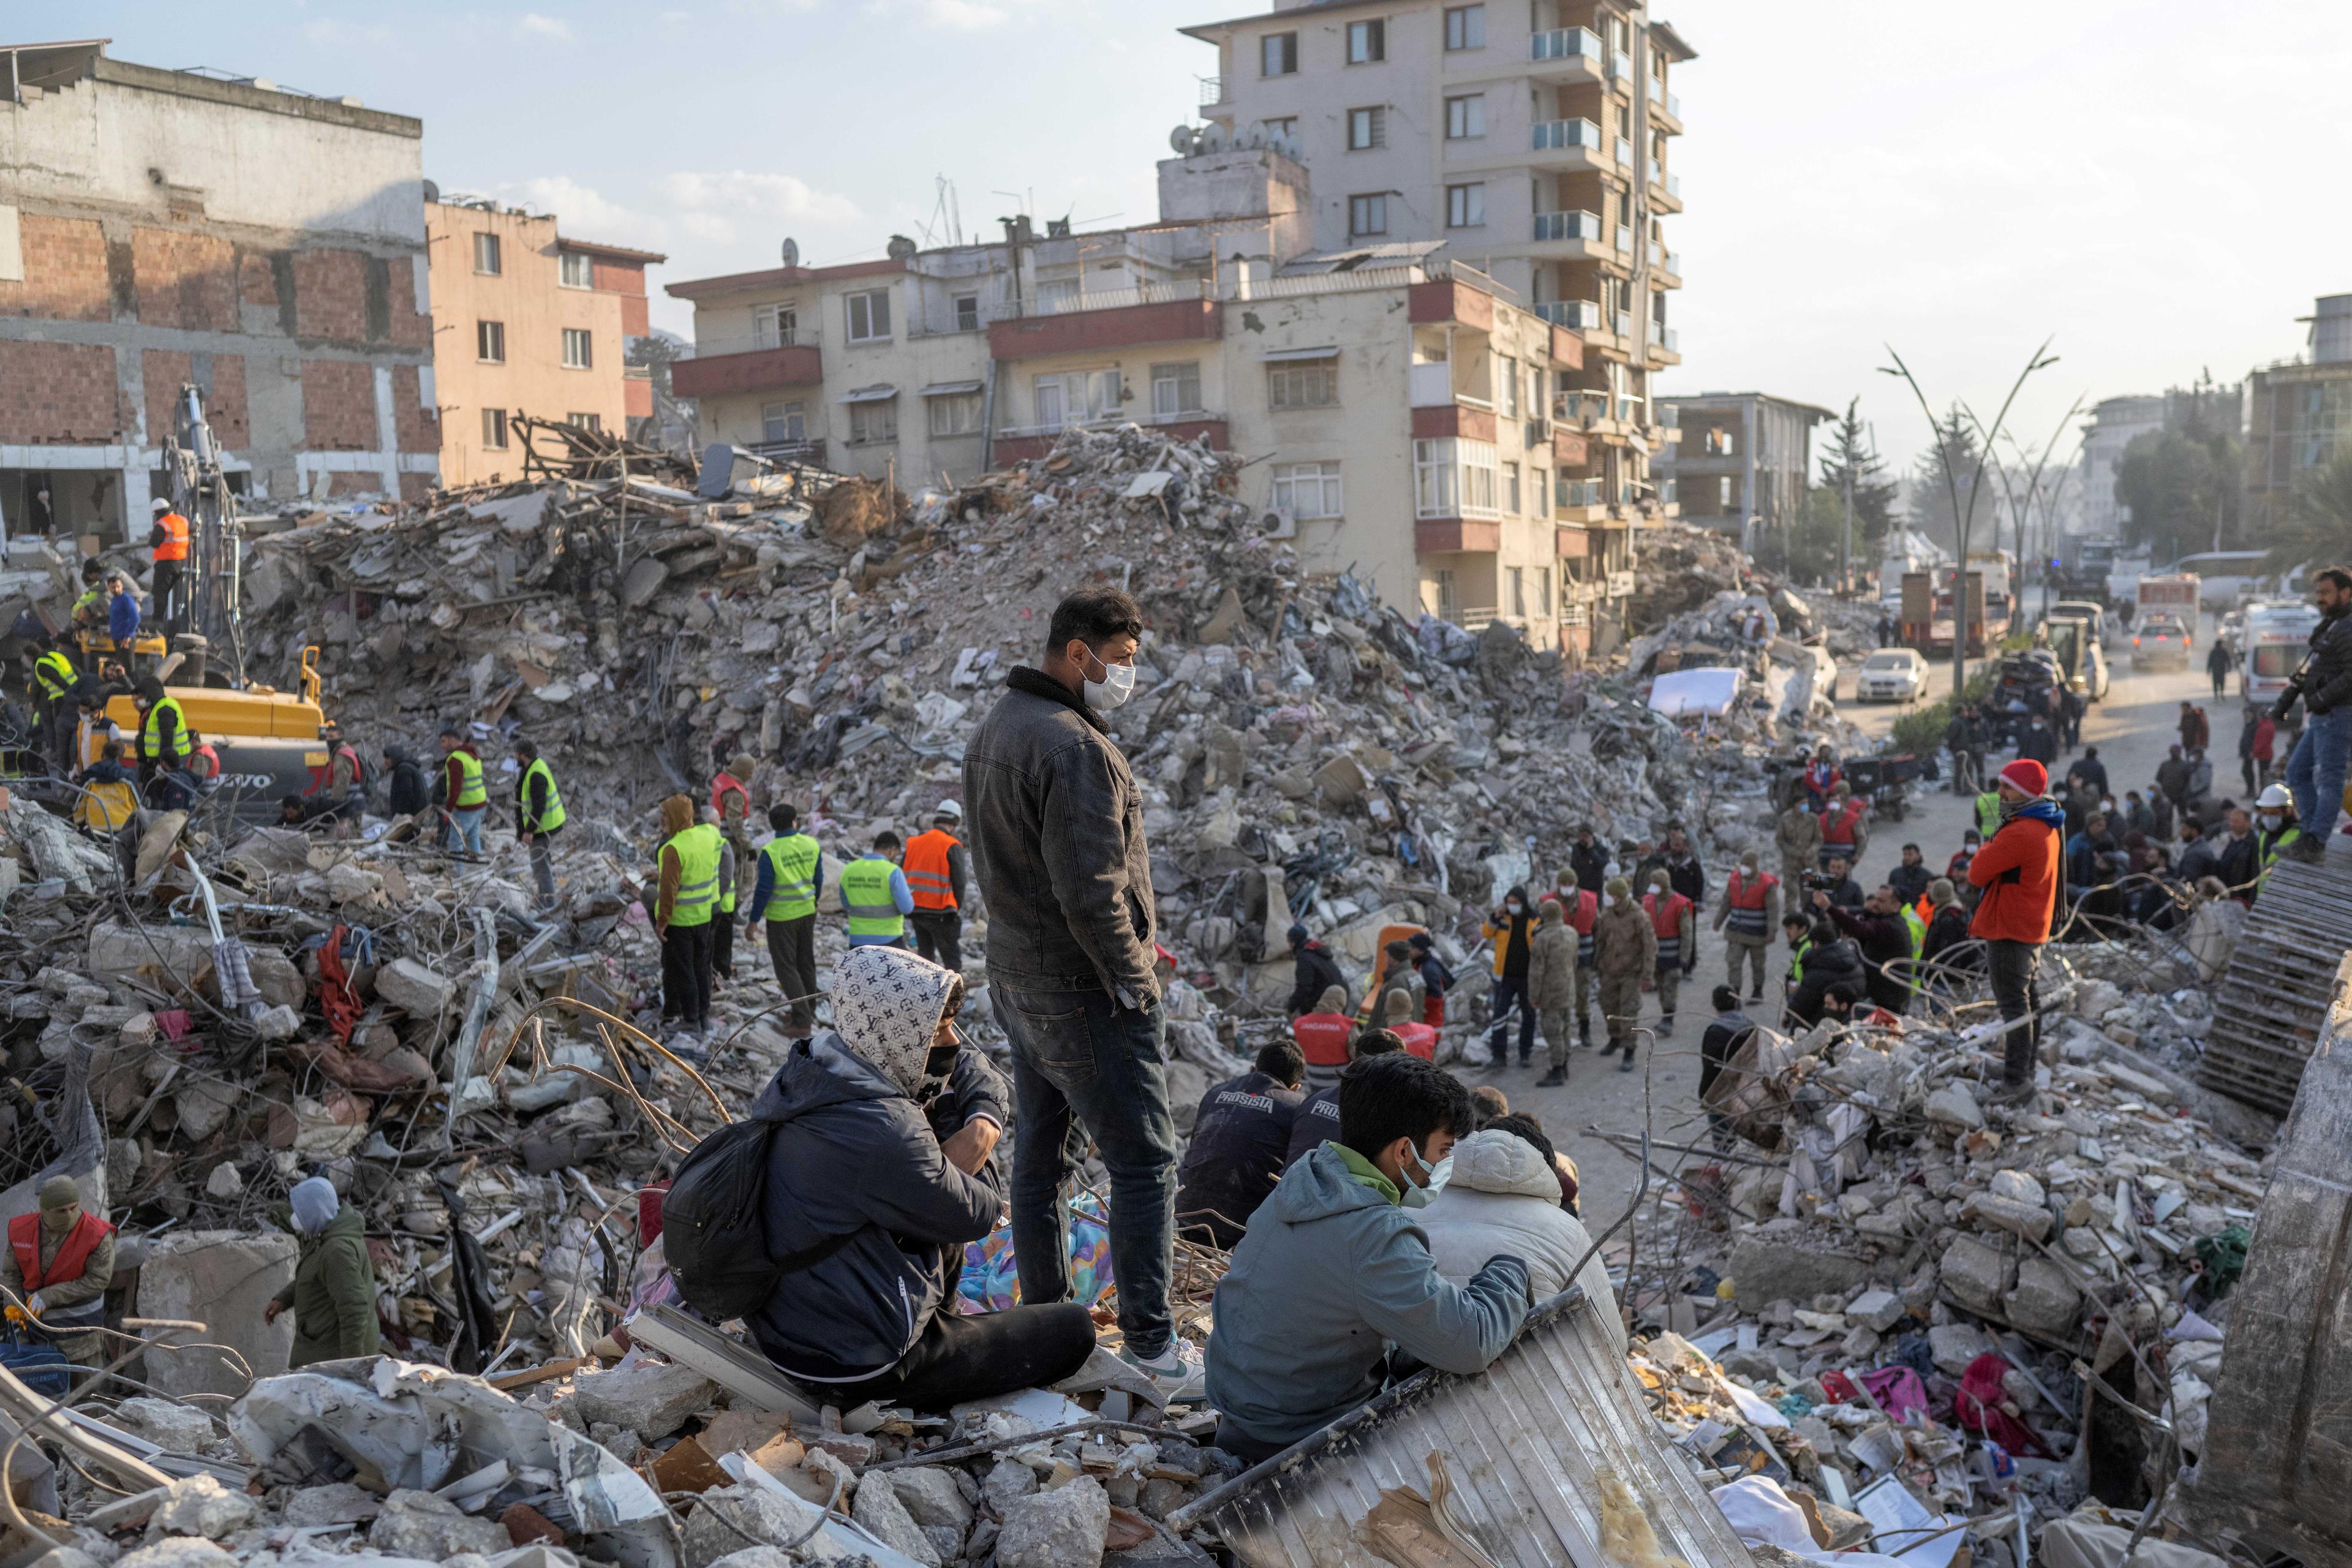 People stand on top of rubble of collapsed buildings during rescue operations  in Hatay on February 12, 2023, after a 7,8 magnitude earthquake struck the border region of Turkey and Syria earlier in the week. (Photo by BULENT KILIC / AFP)